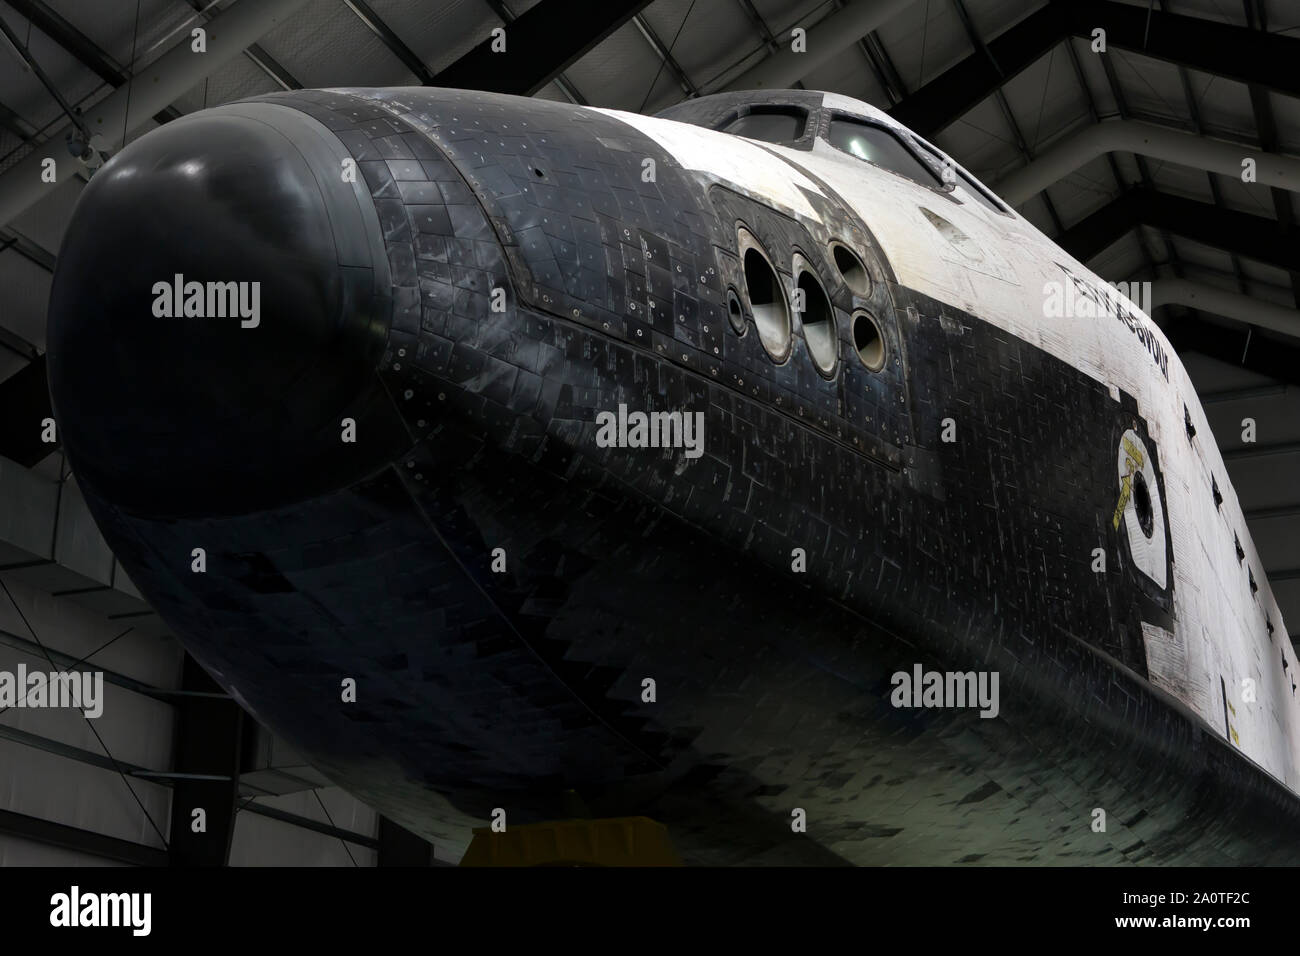 LOS ANGELES - The space shuttle Endeavour on display in the California Science Center. Stock Photo